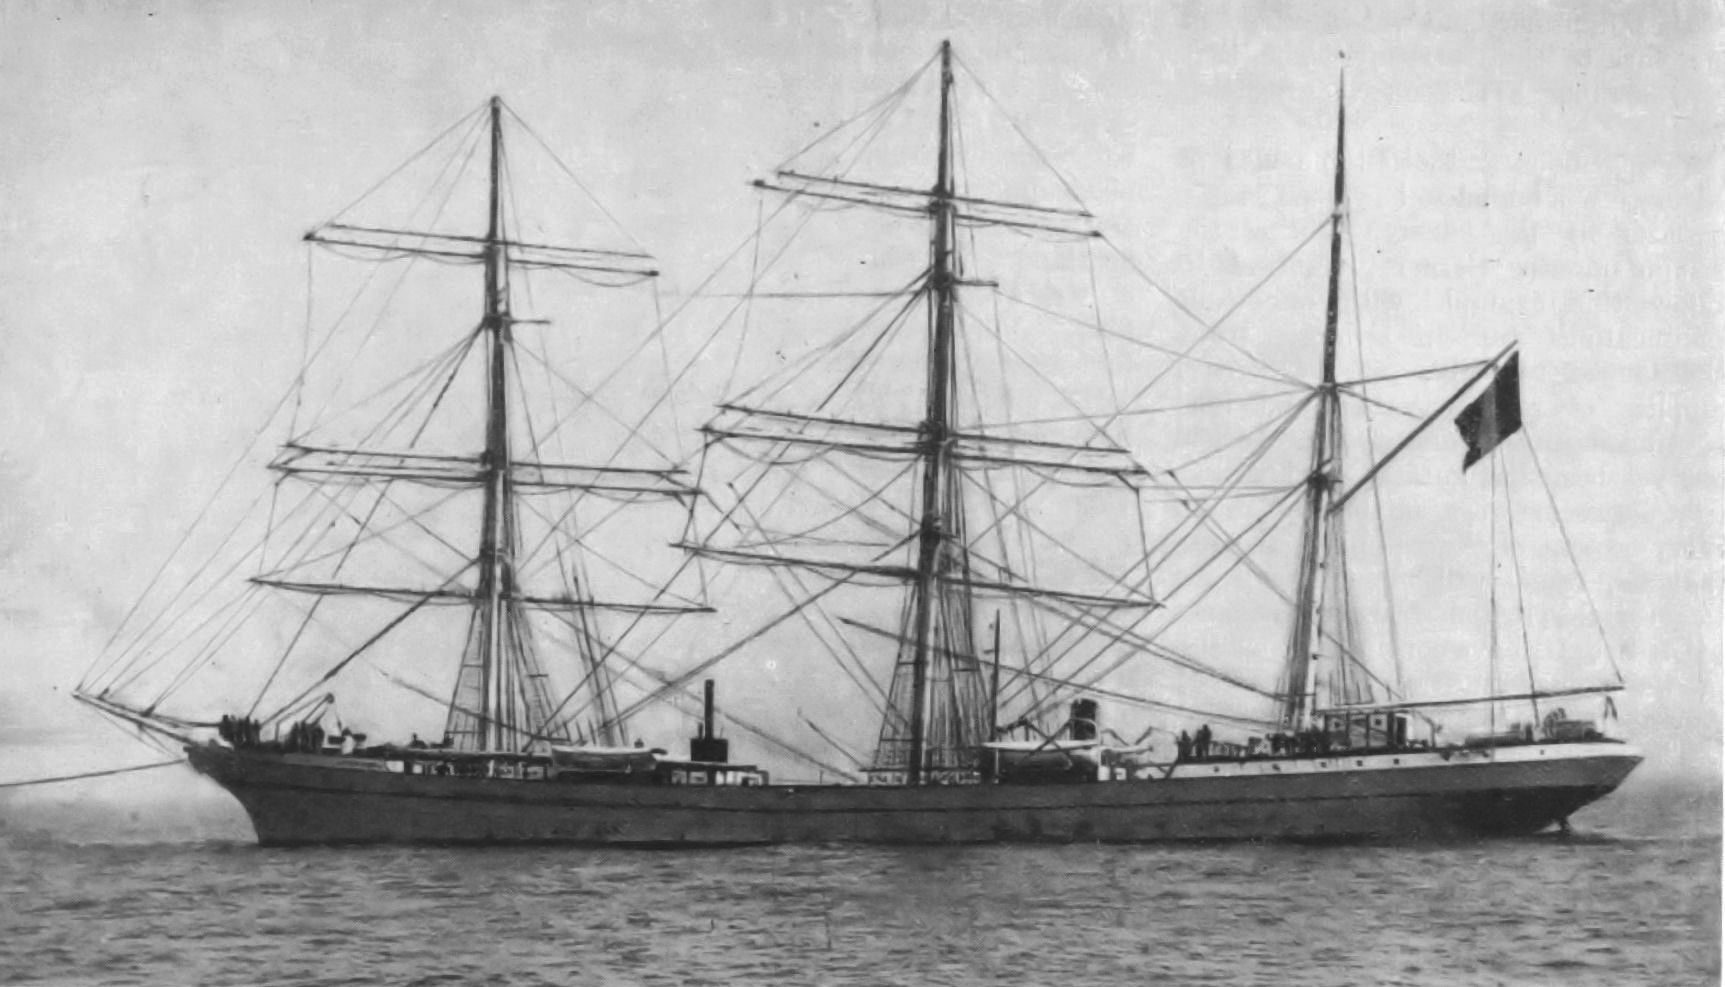 The French merchant vessel Charles Gounod, sunk by Luckner’s Seeadler off the South American coast on January 21, 1917.